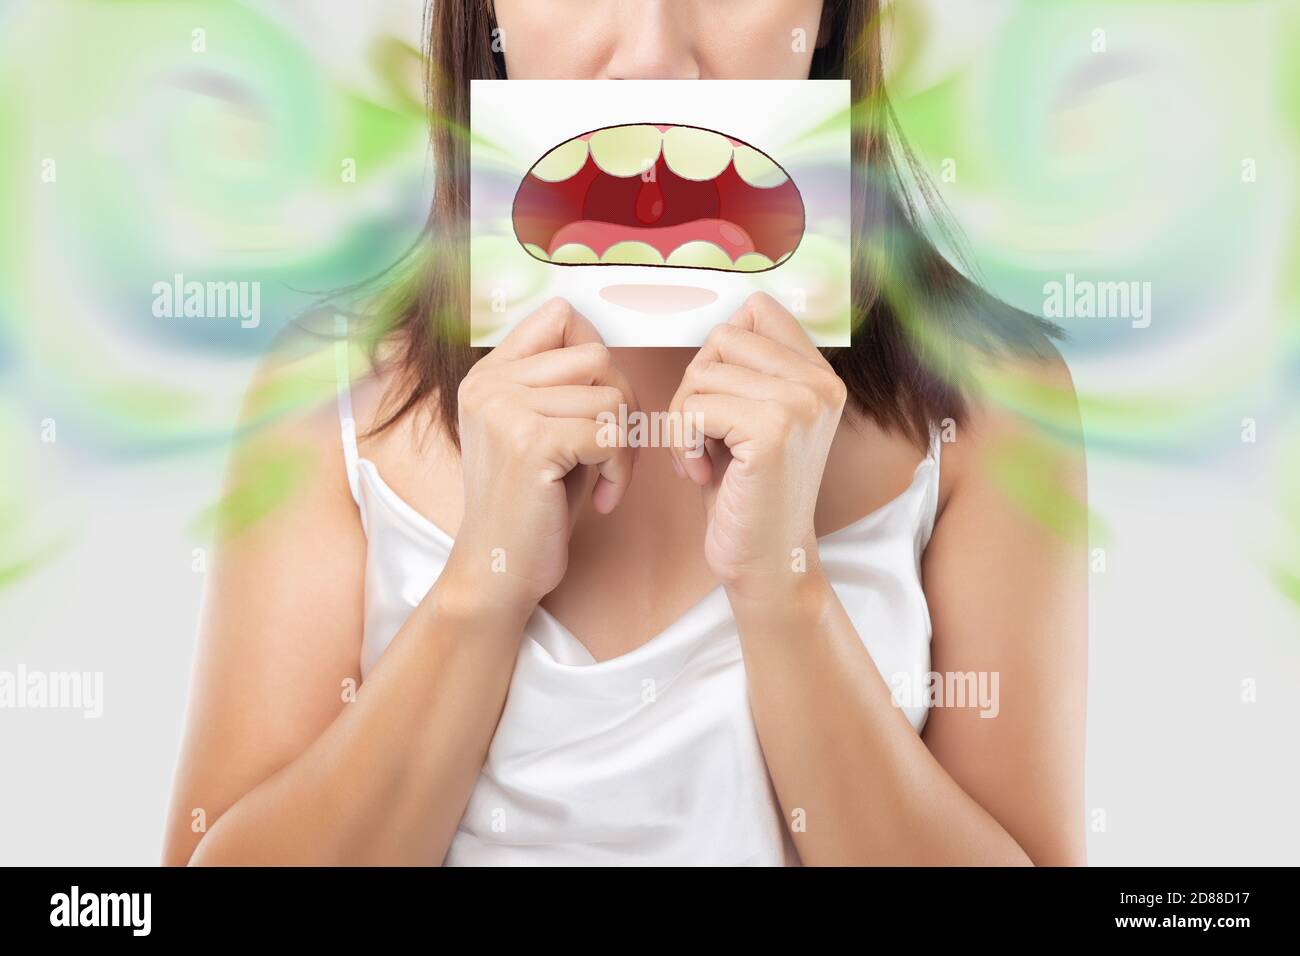 A woman wearing white dress holding a white paper with an open mouth cartoon image. On a light gray background. Bad breath or Halitosis. The concept w Stock Photo